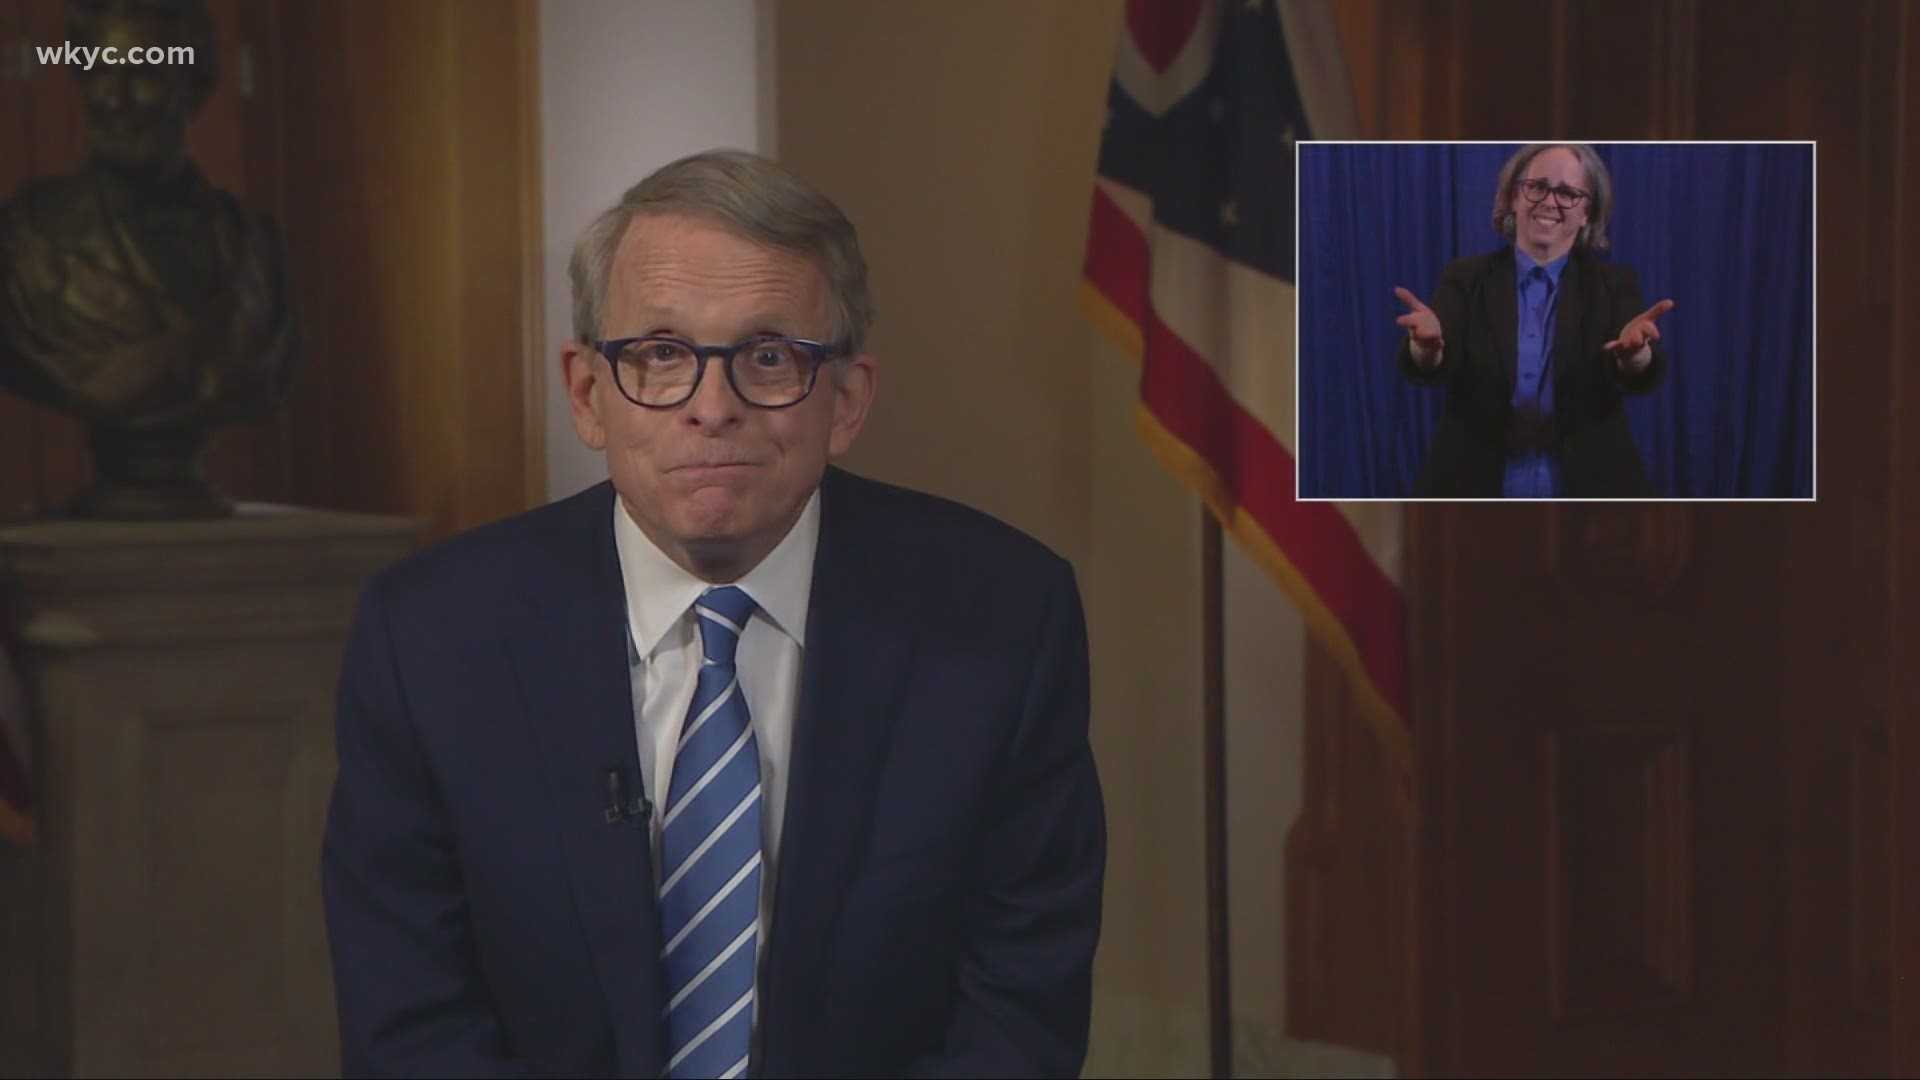 Ohio Gov. Mike DeWine has set a goal to lift the state's COVID-19 health restrictions. That goal? Having new cases at 50 or below per 100,000 for two weeks.